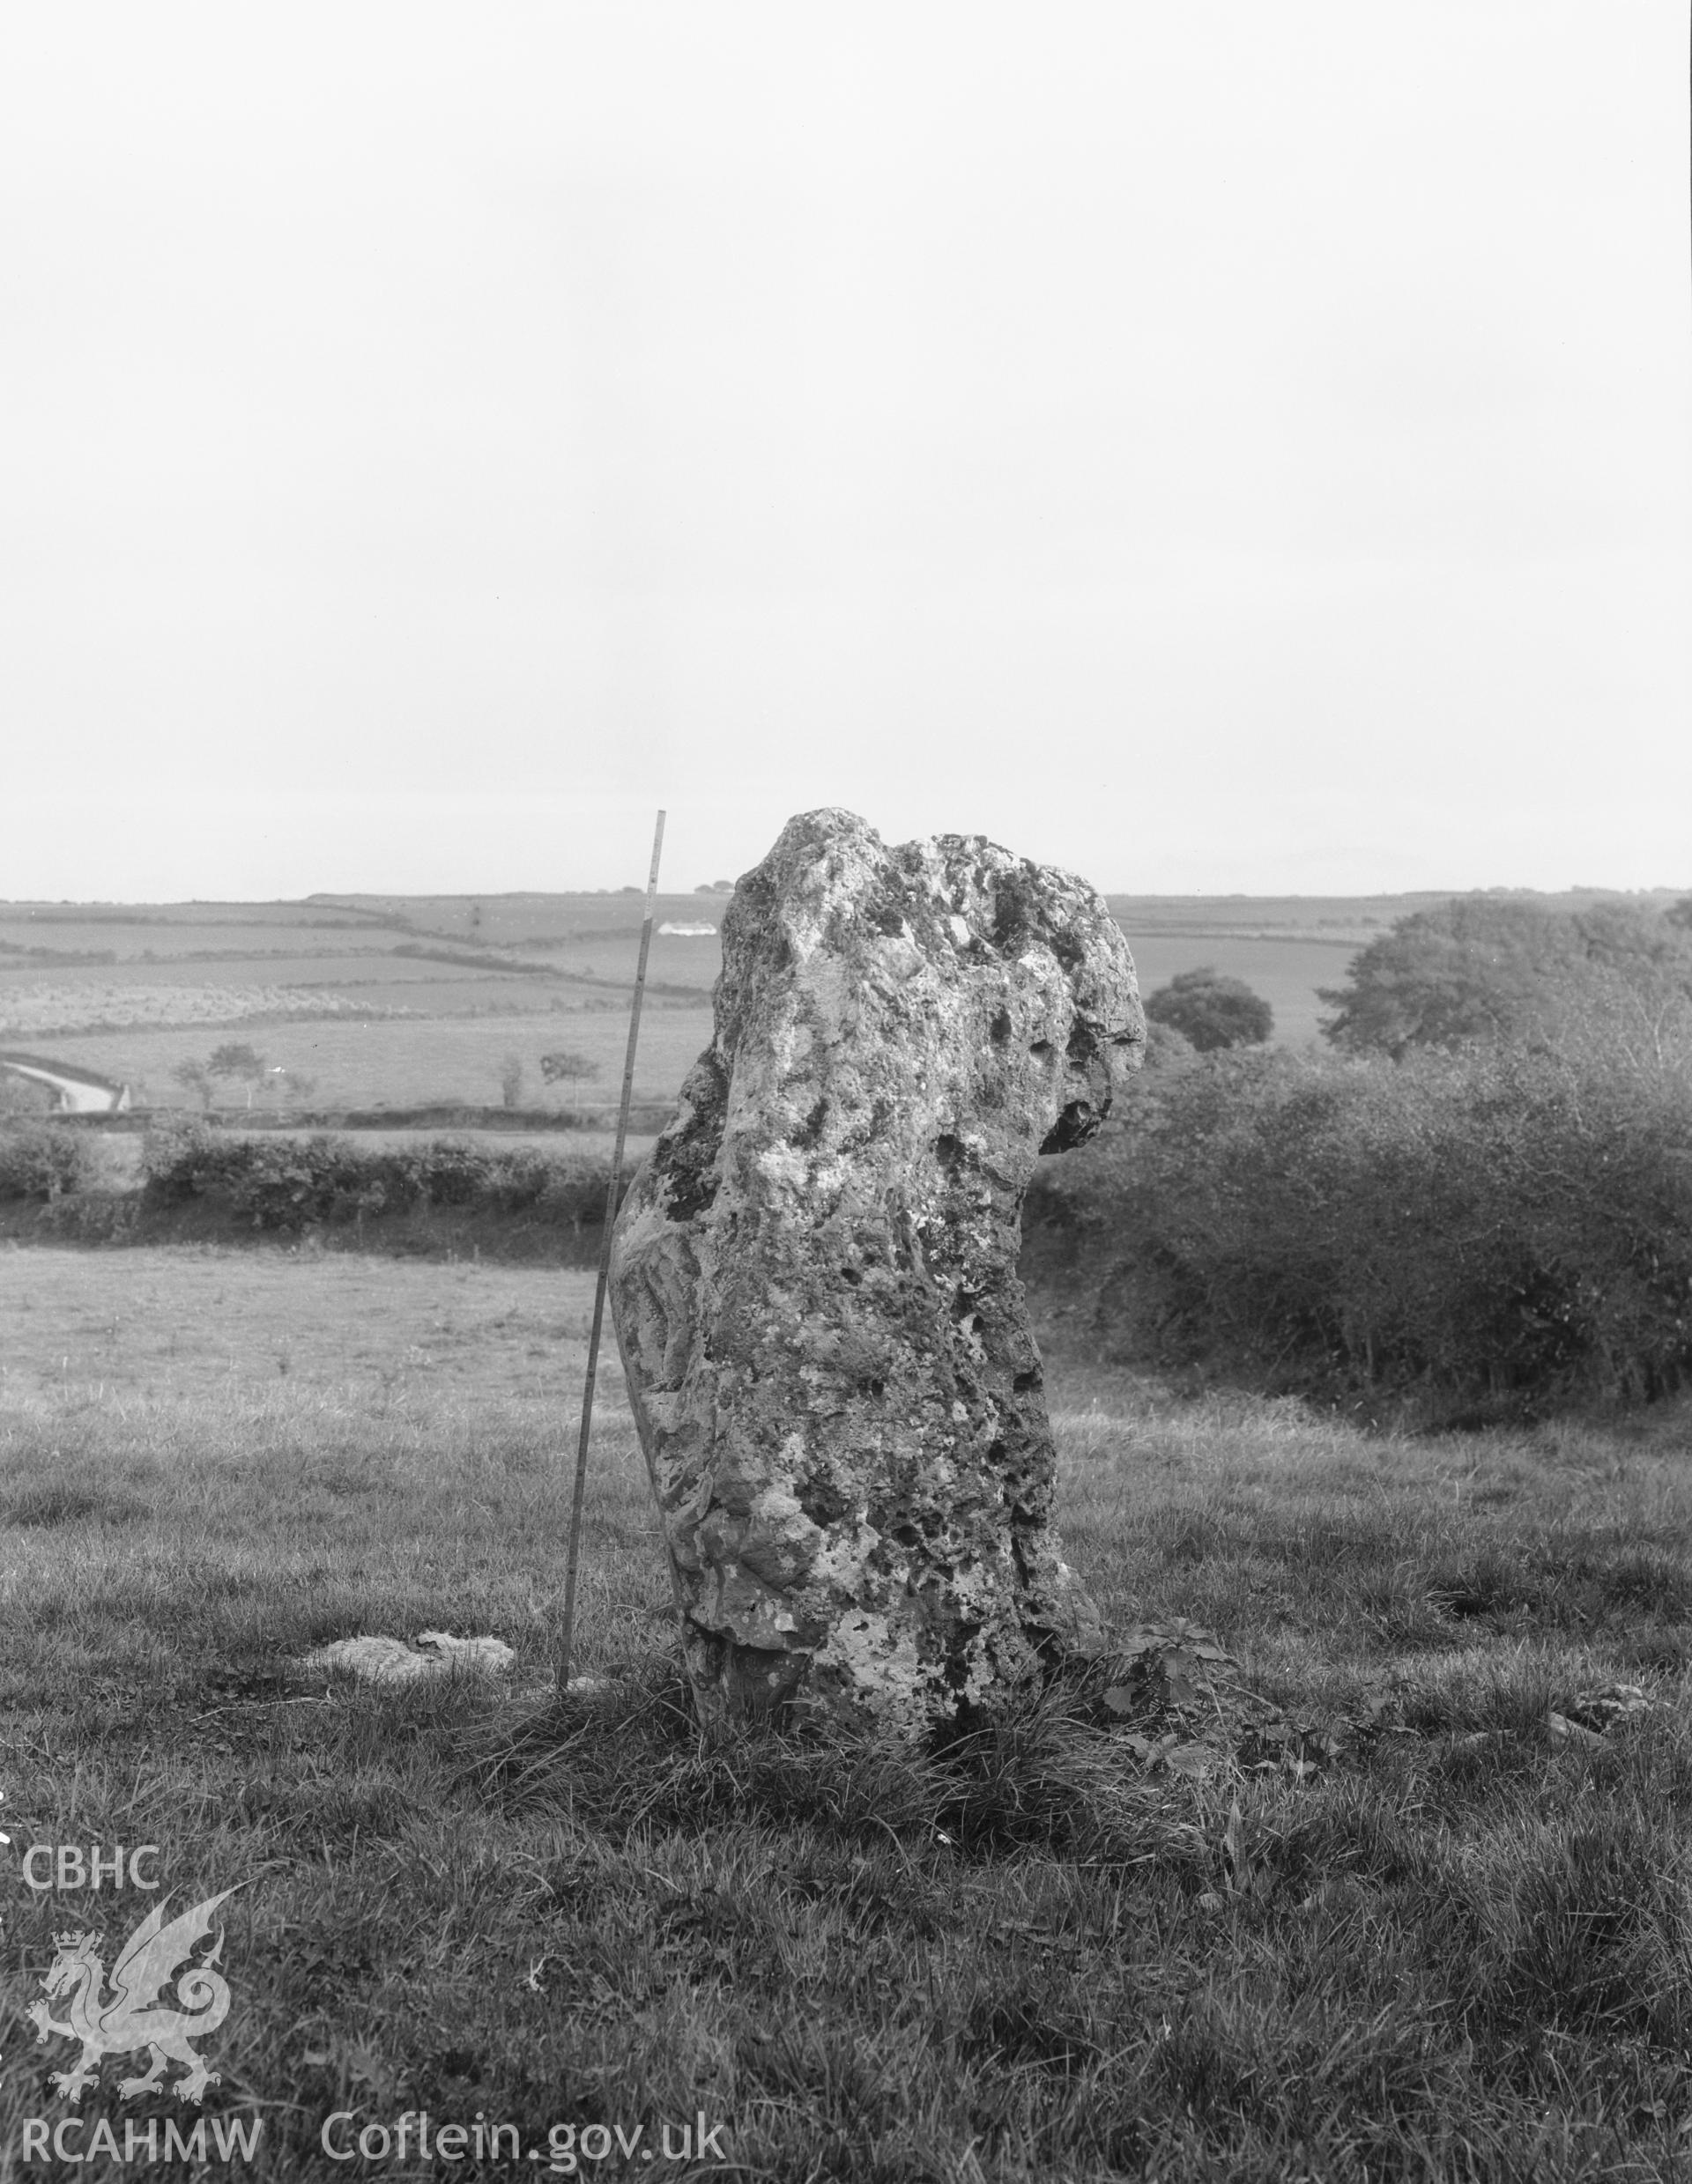 Black and white photograph showing Carreg Leidr taken by RCAHMW before 1960.